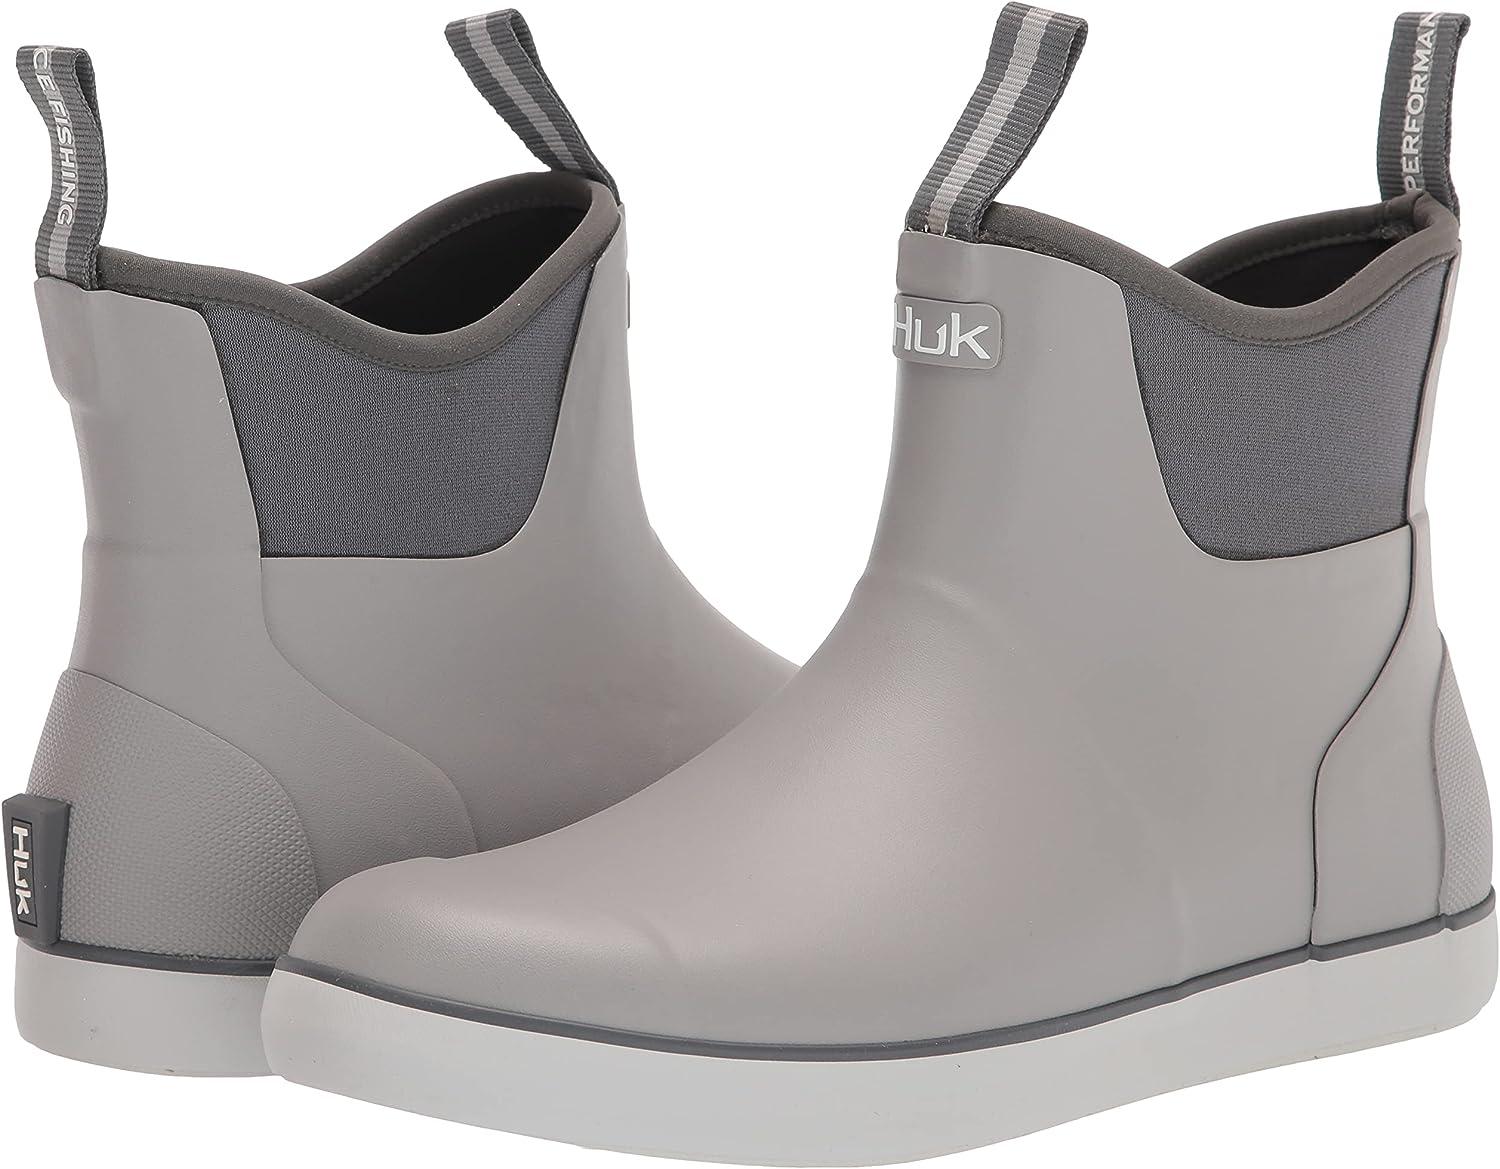 HUK Performance Fishing Rogue Wave Boots - Men's, Color: Grey